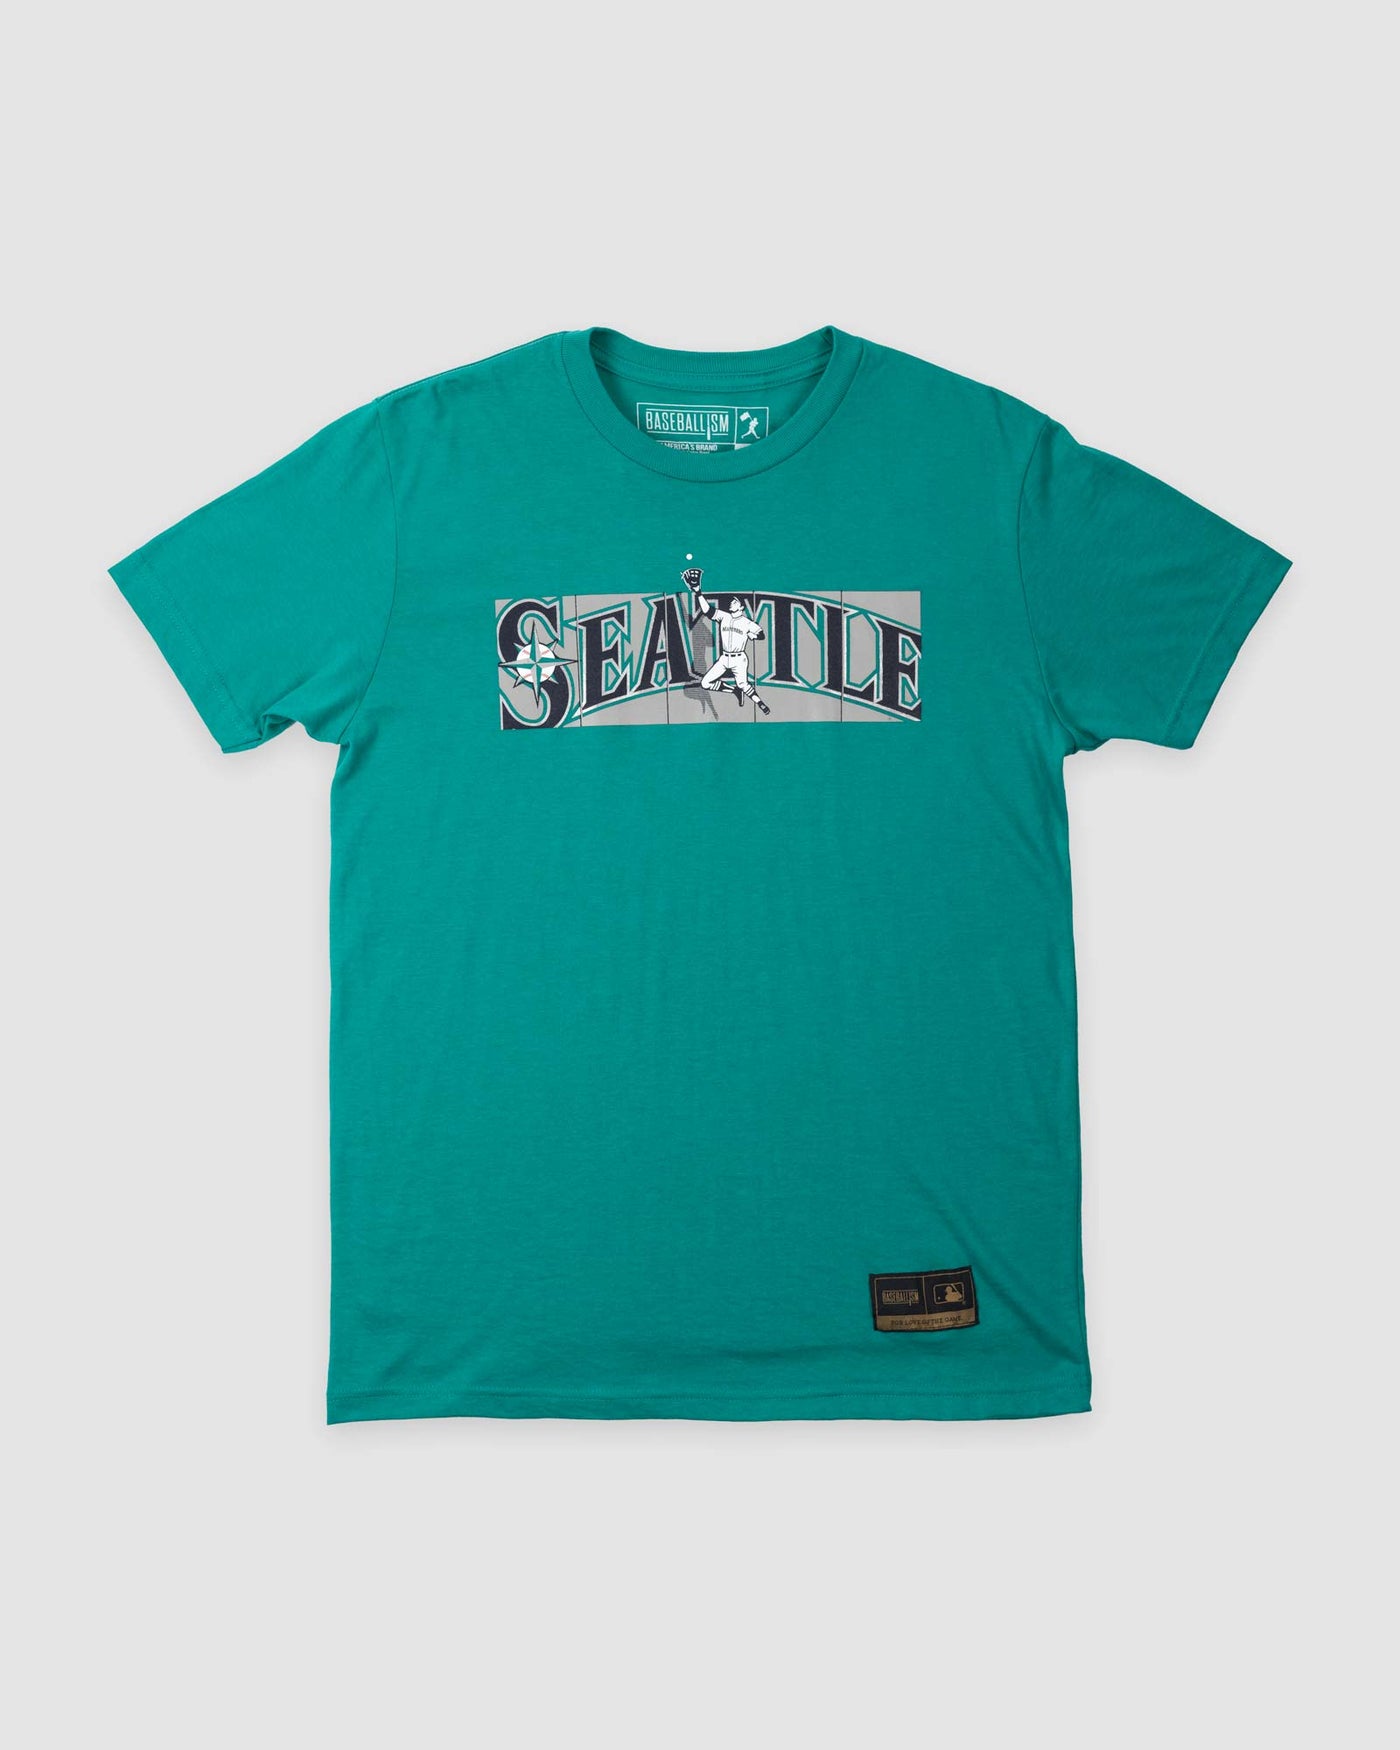 Outfield Fence Tee - Seattle Mariners